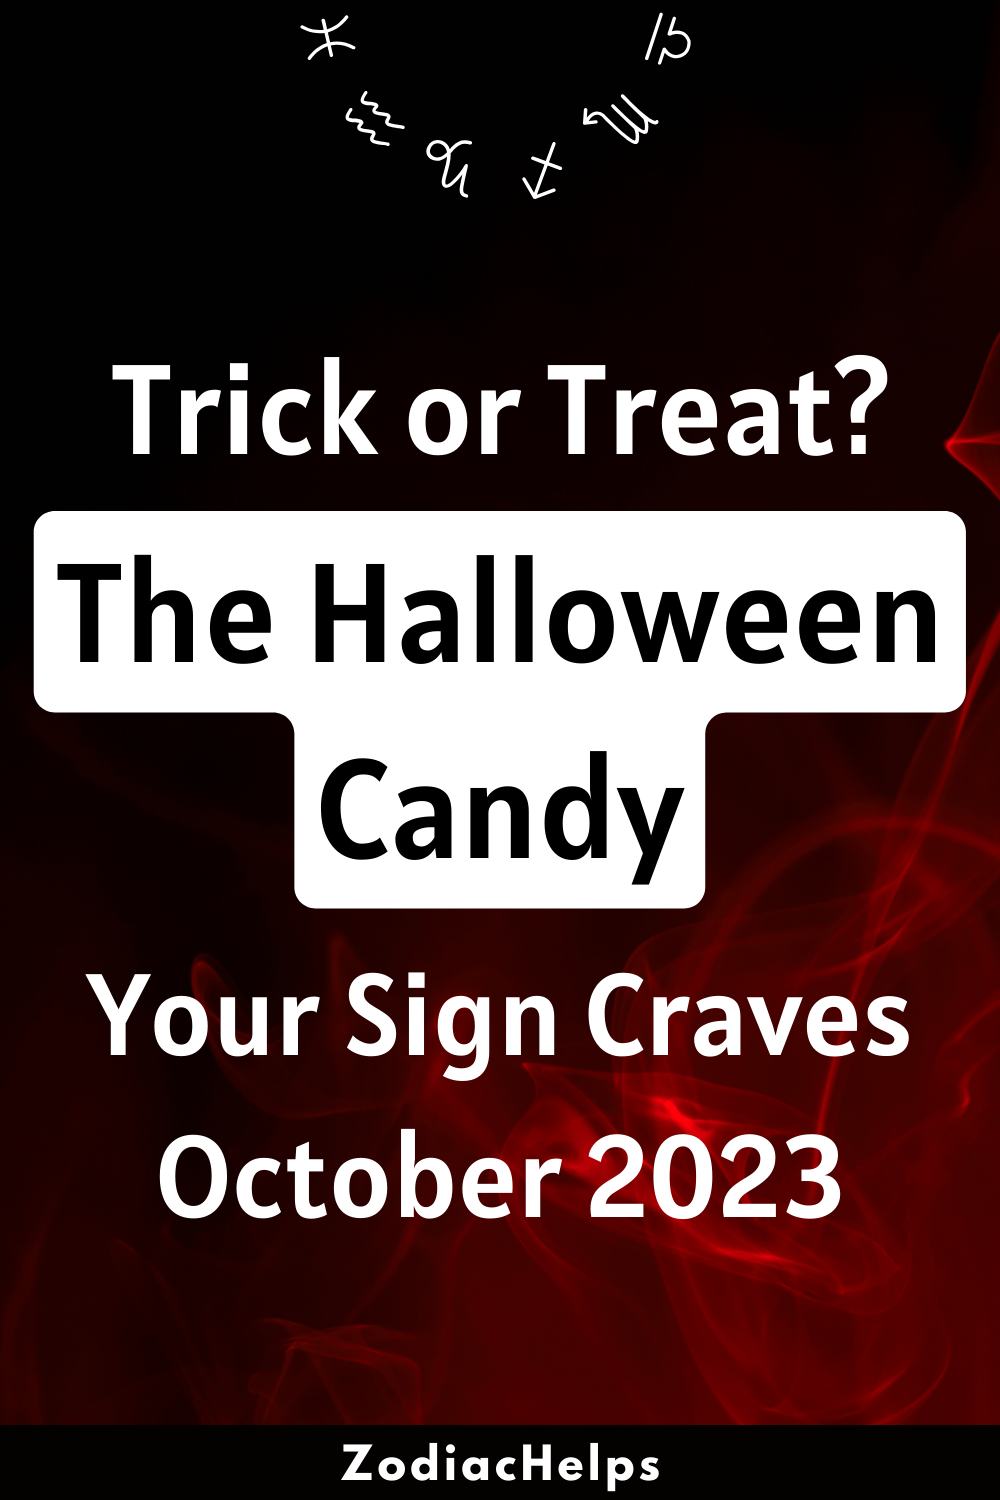 Trick or Treat? The Halloween Candy Your Sign Craves October 2023